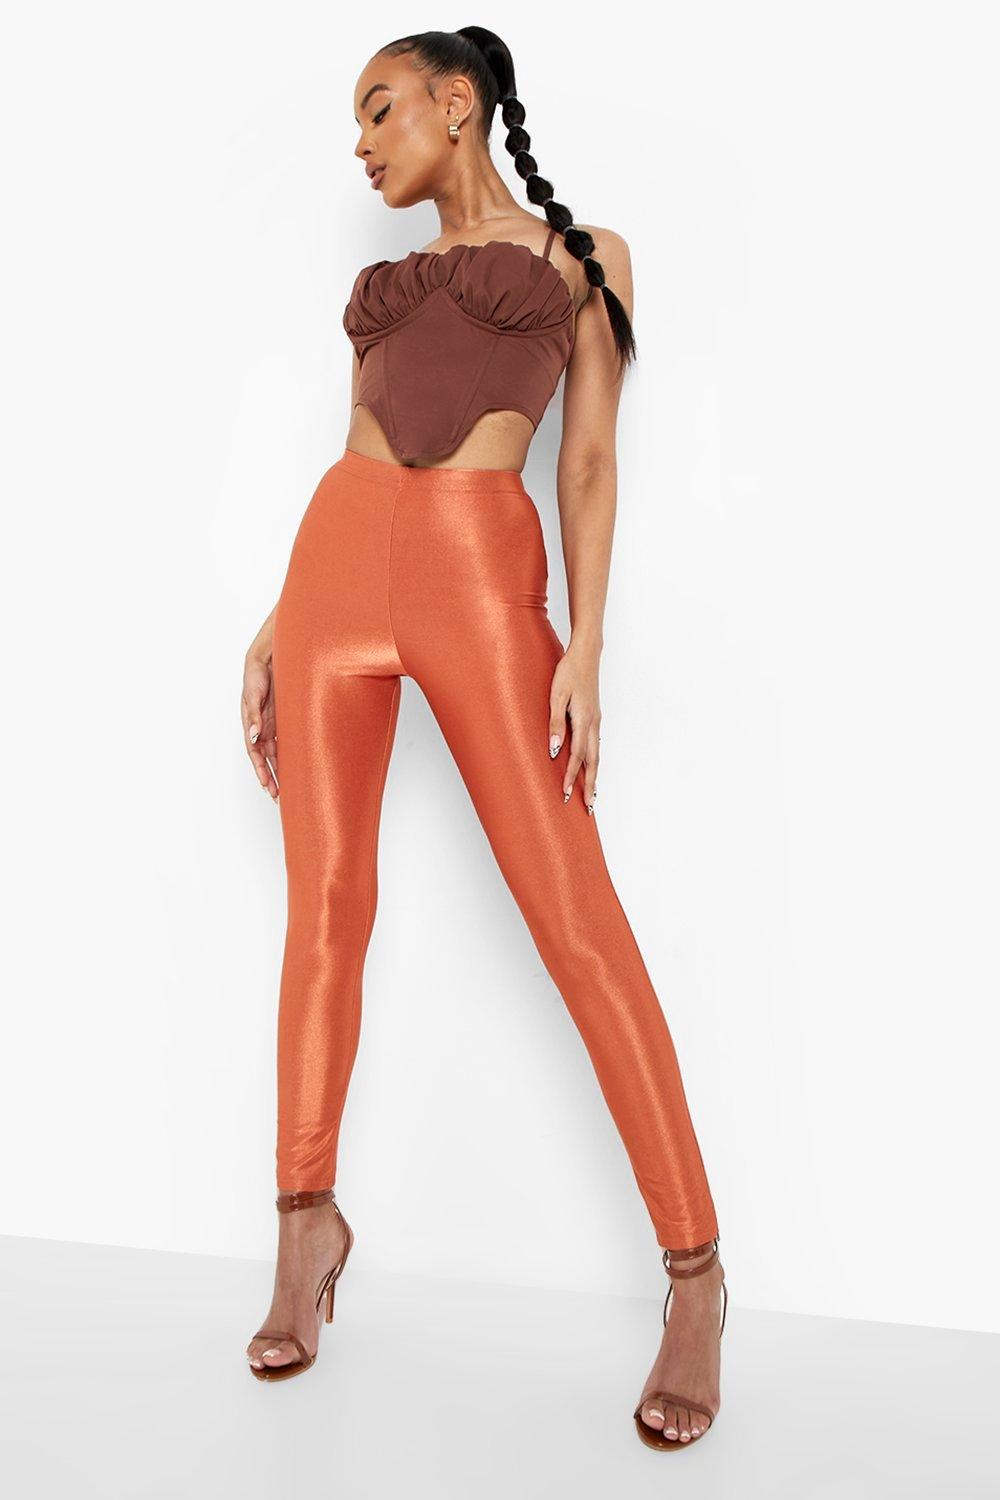 Buy Women's Stretch Fit Satin Leggings (CO2-RD+GRN 4XL_Red, Green_4XL) at